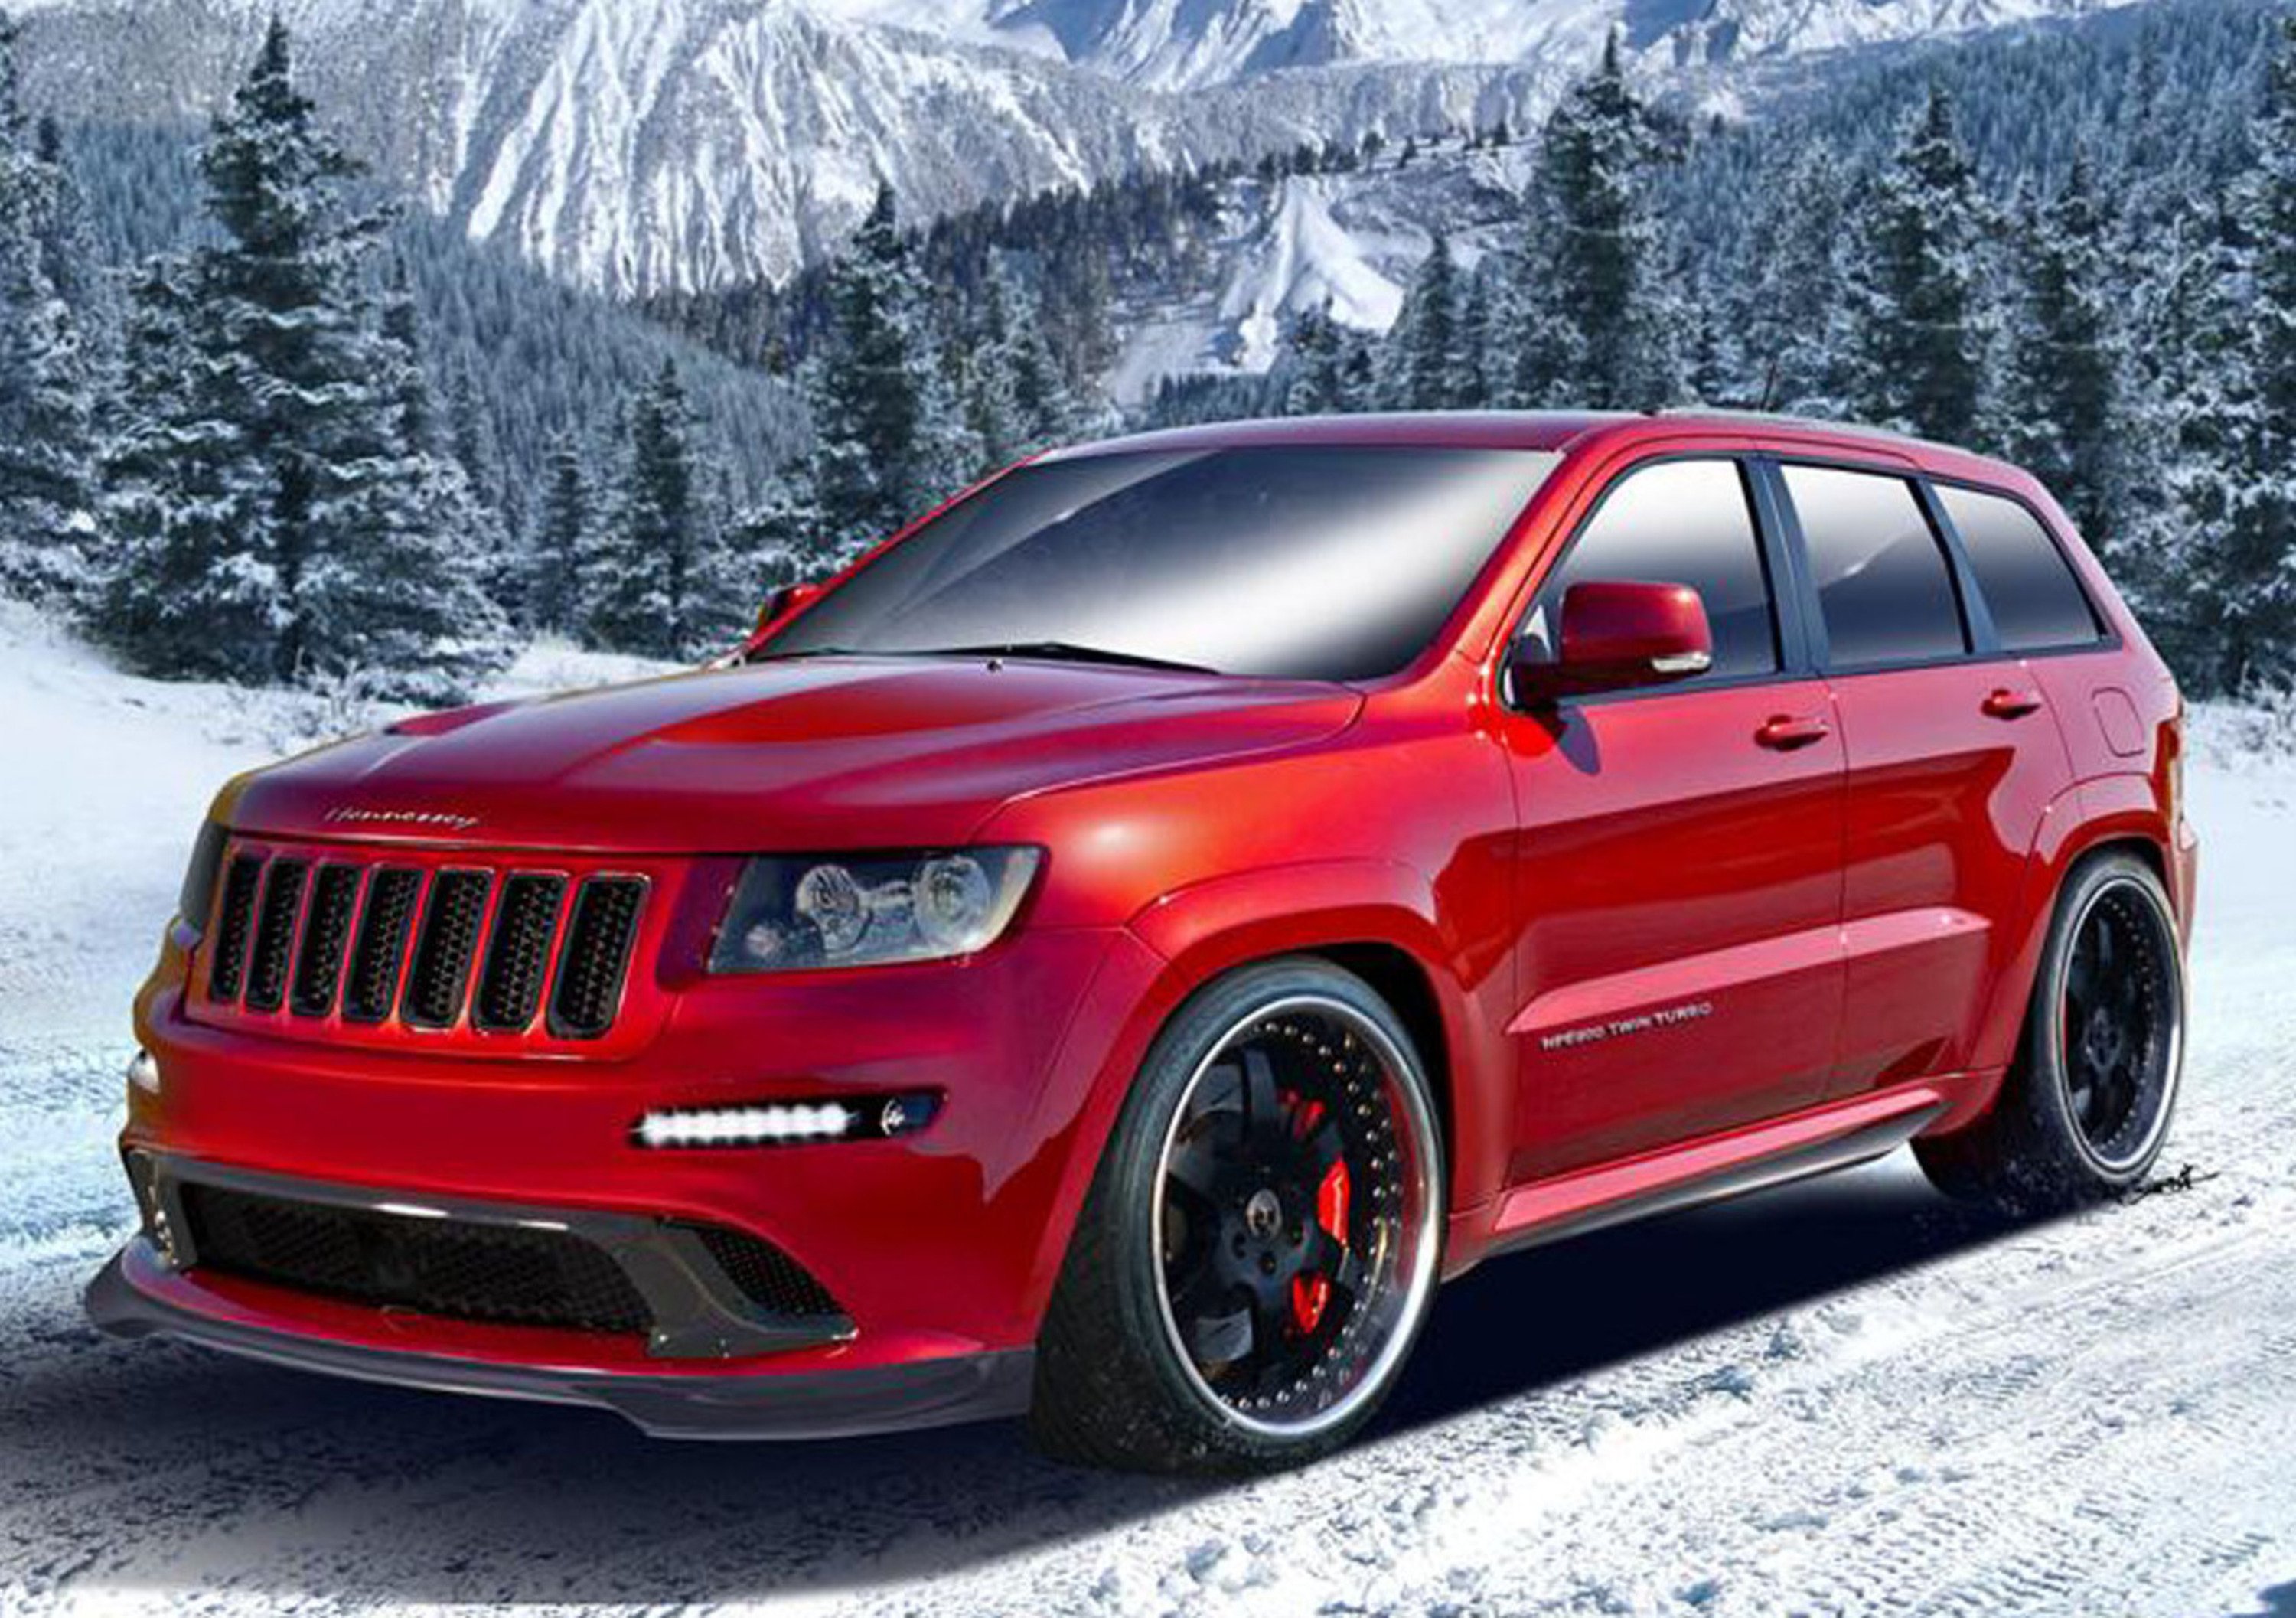 Grand Cherokee SRT8 HPE 800 by Hennessey Performance